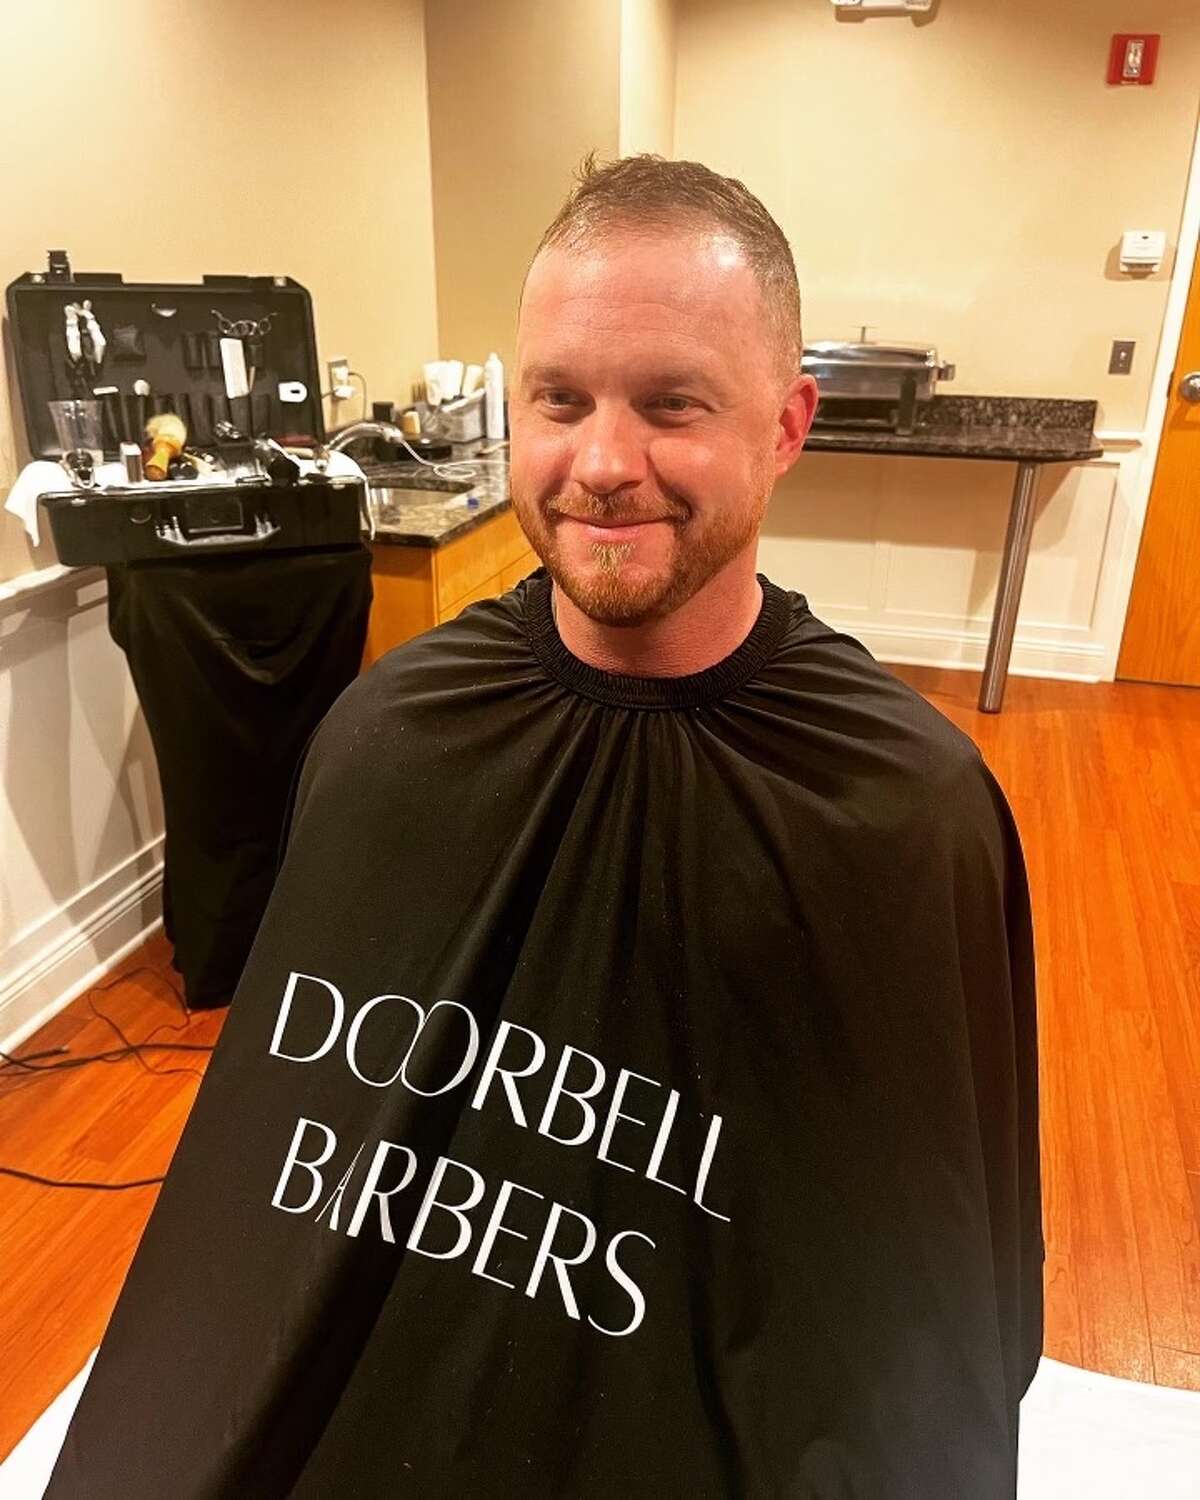 Cody Johnson gets his hair cut by CT barber before Bridgeport concert